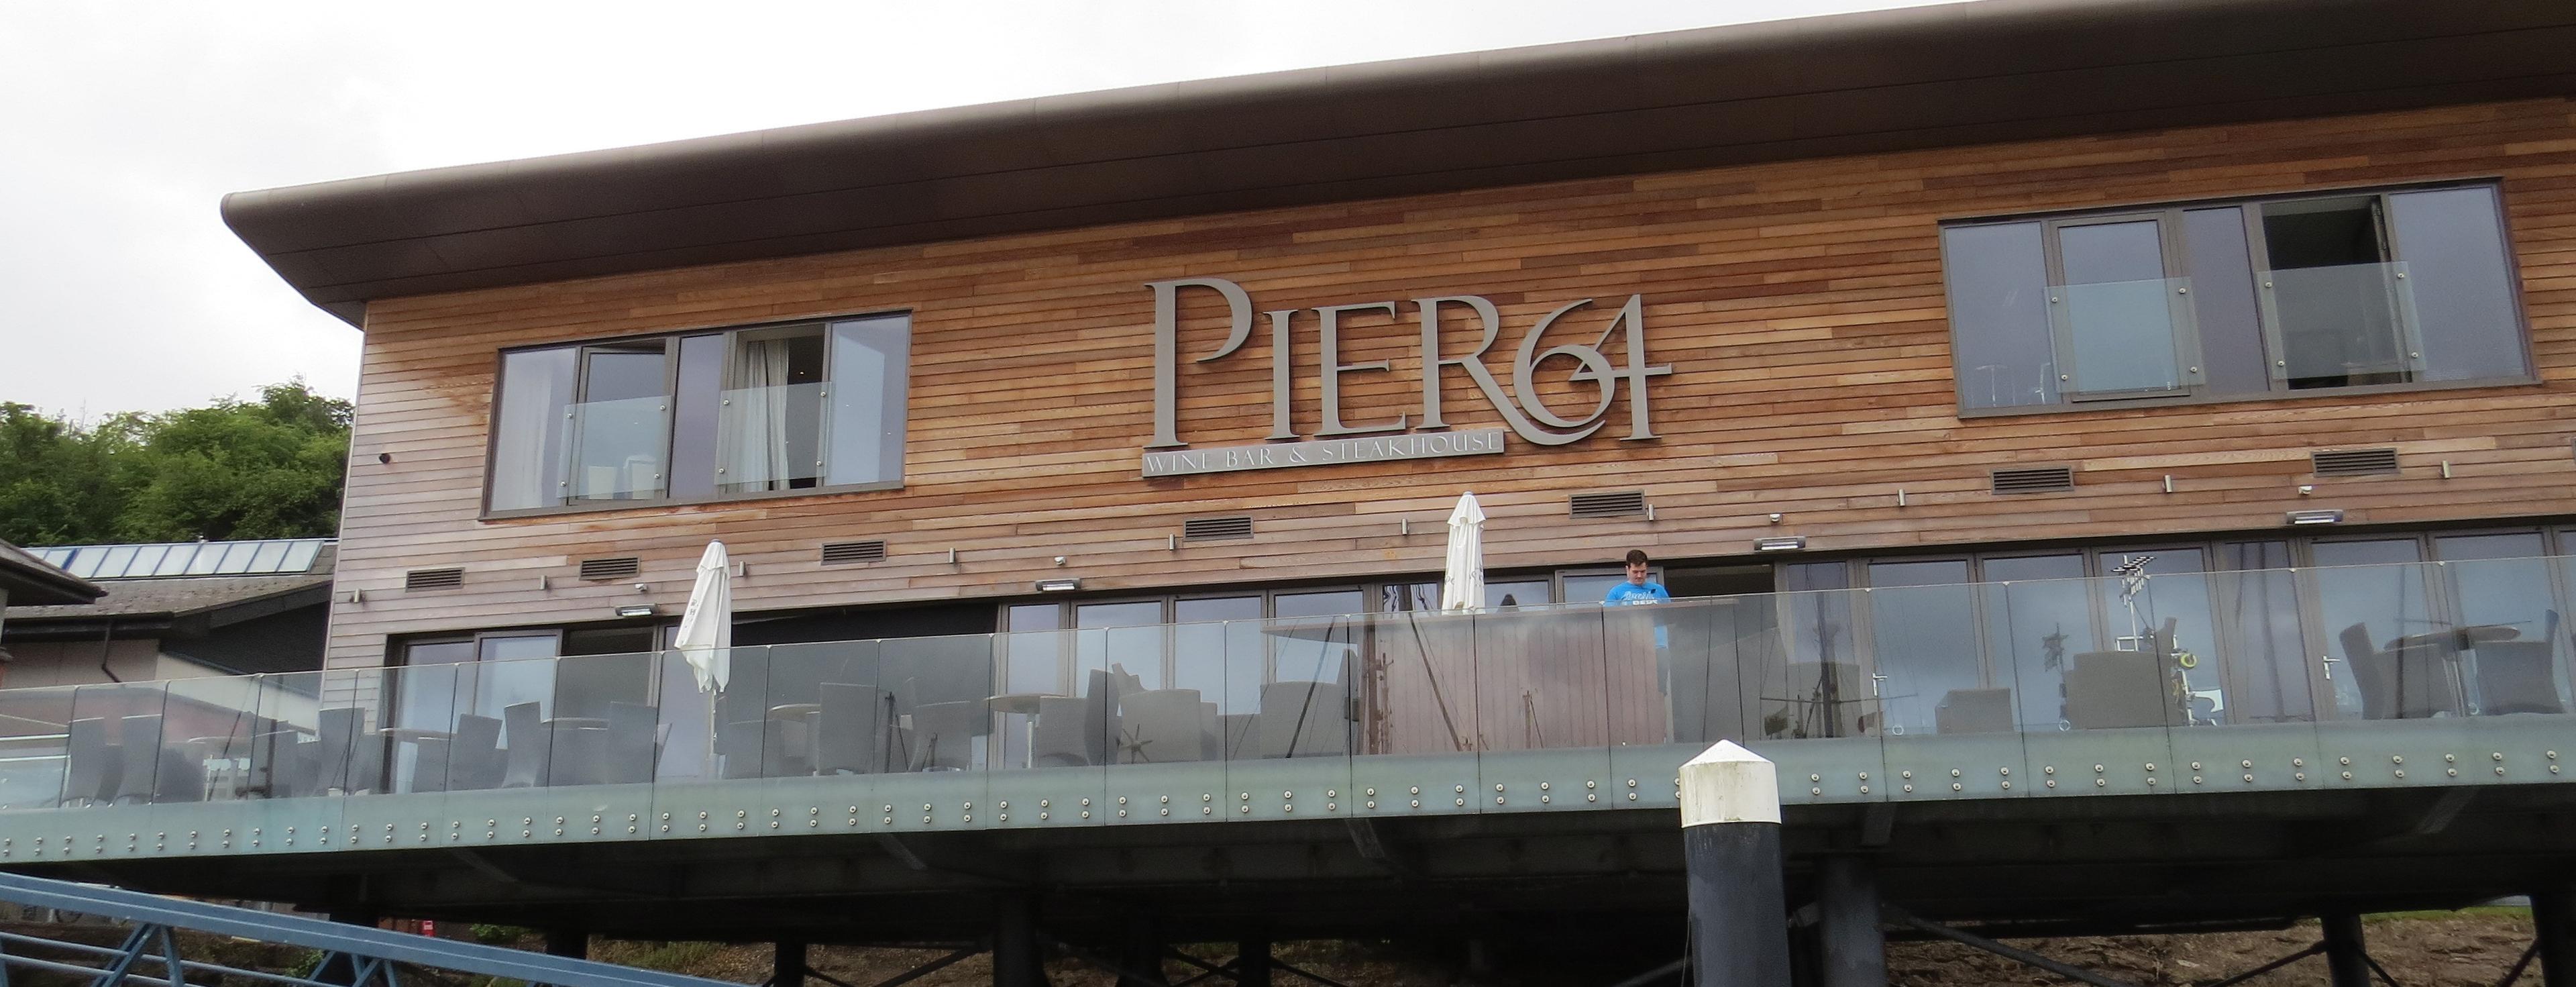 Cover image of this place Pier64 Wine Bar & Steakhouse